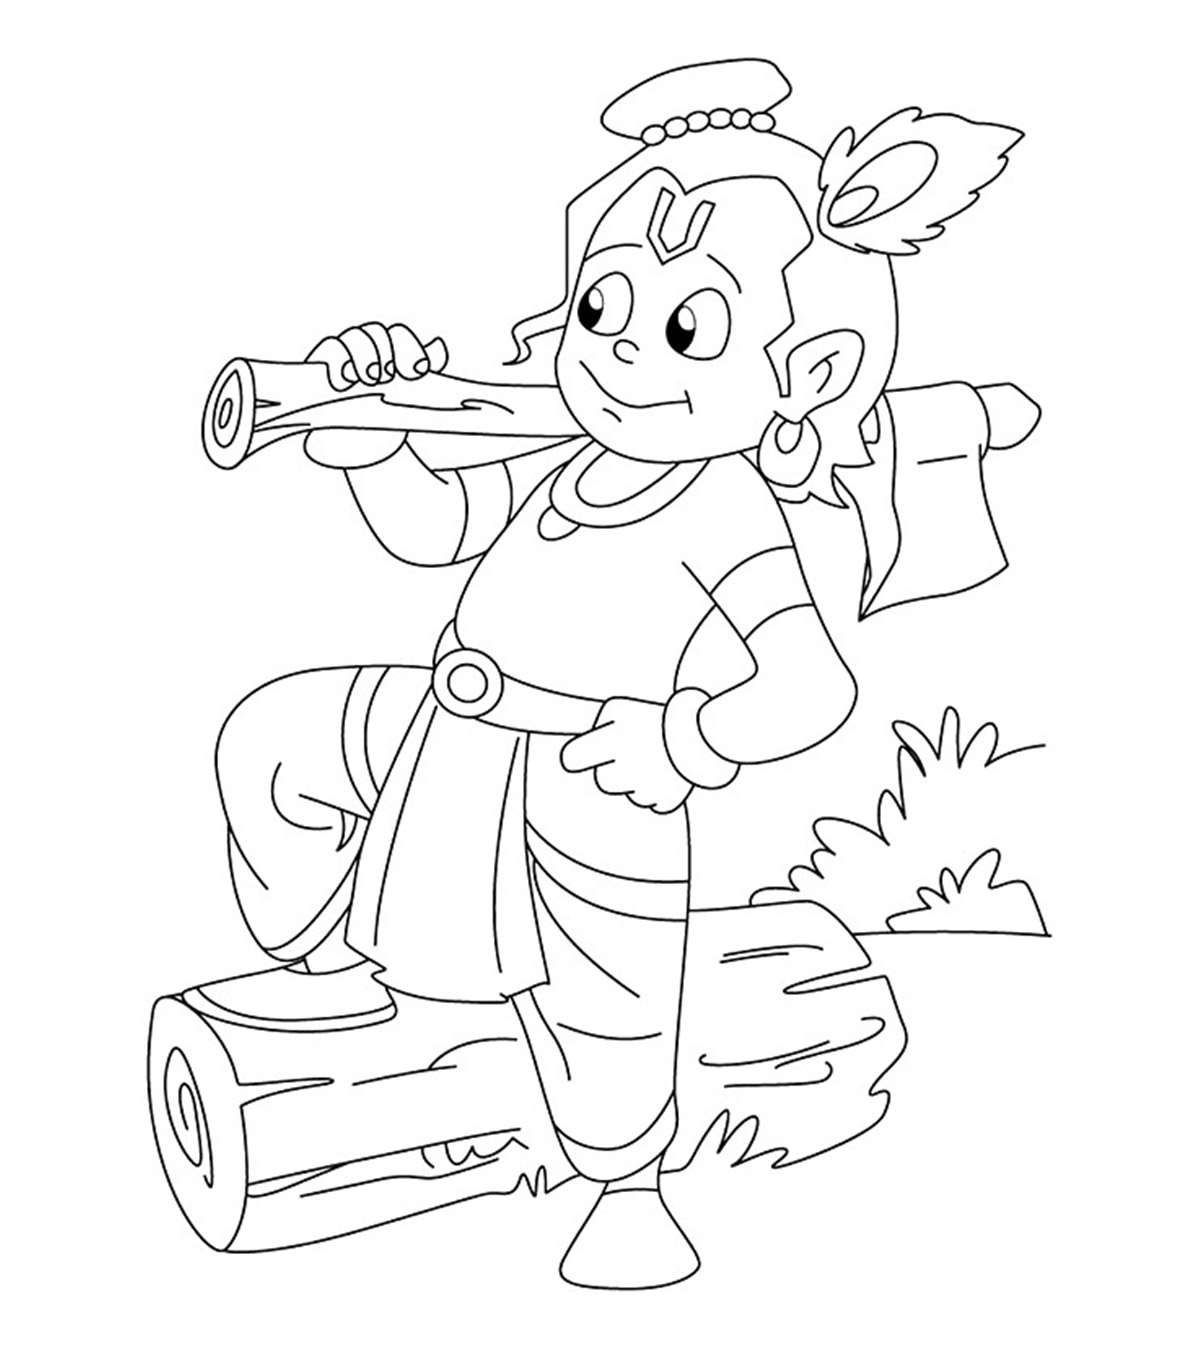 10 Wonderful Lord Krishna Coloring Pages For Toddlers_image